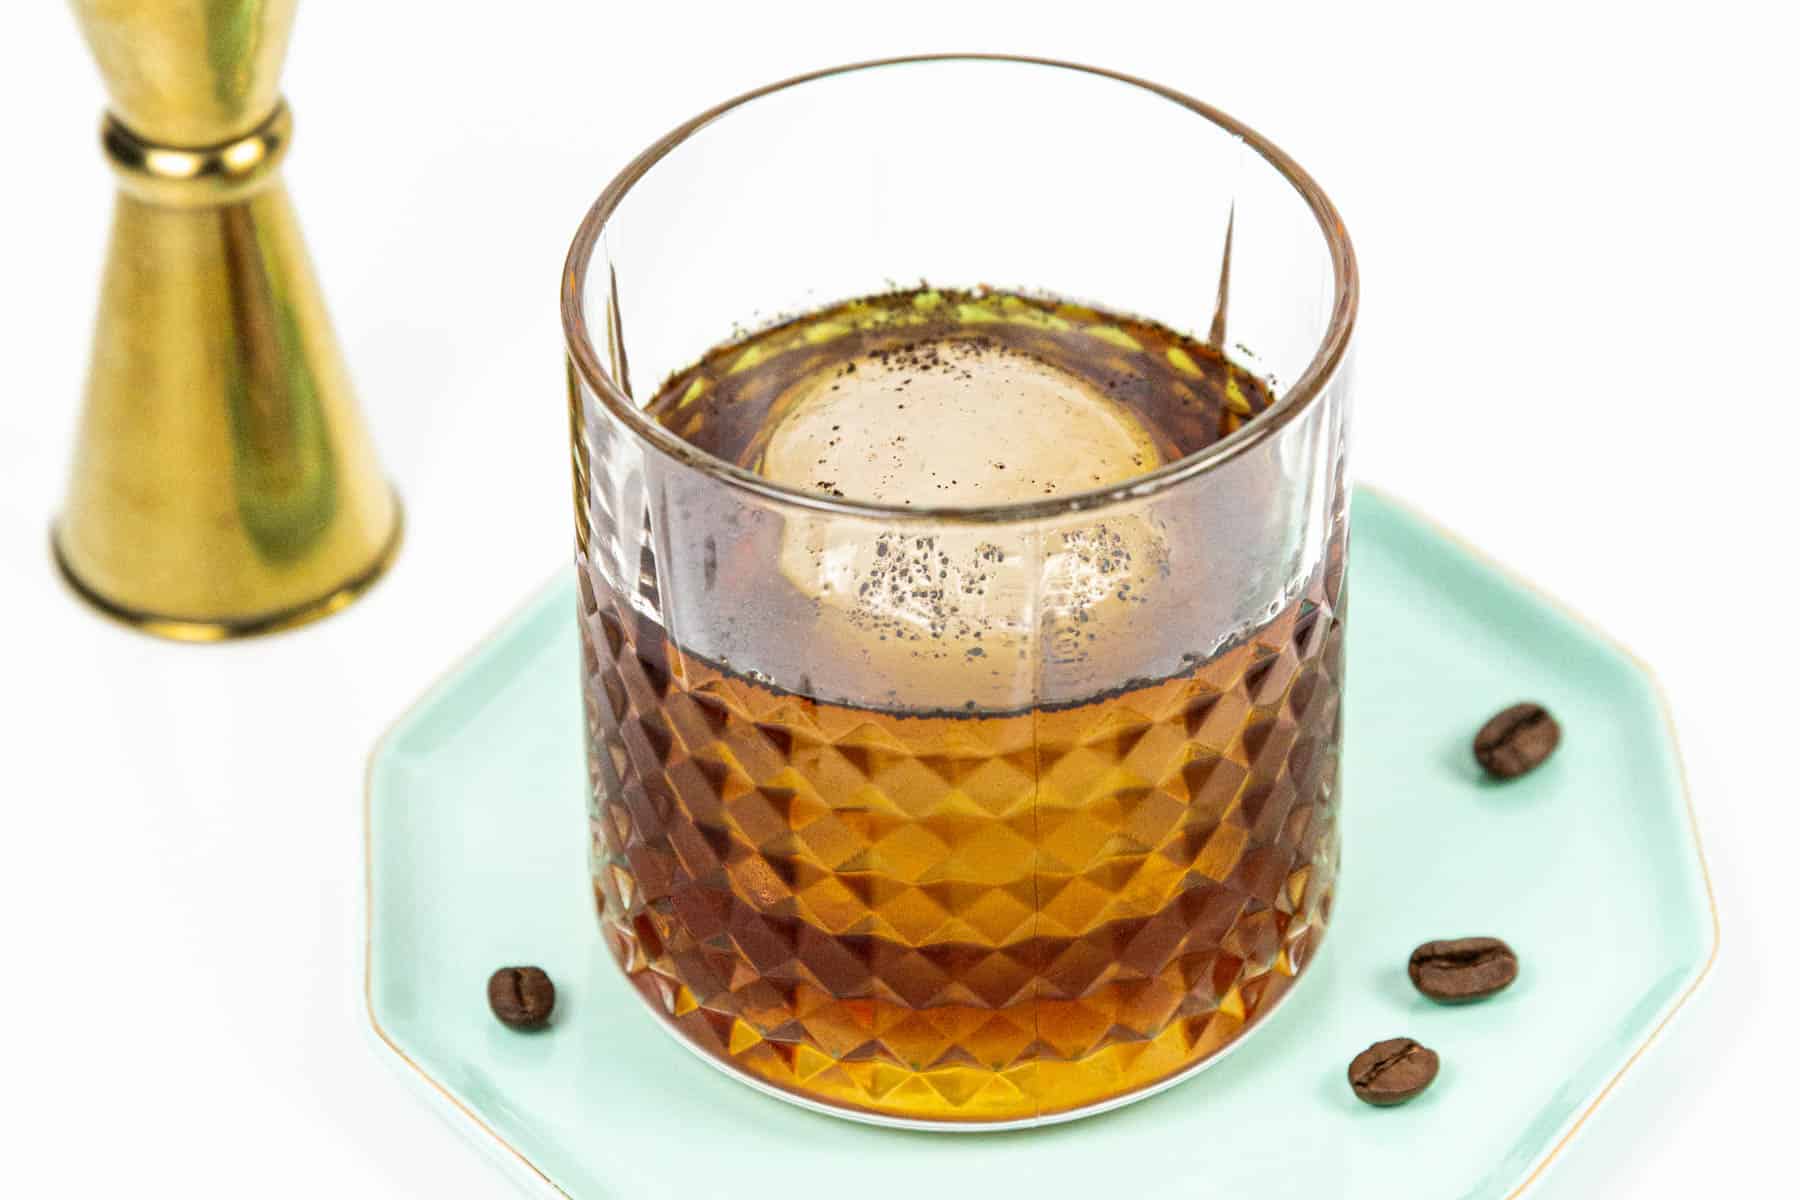 A glass of coffee cocktail with ice and coffee beans on a plate.